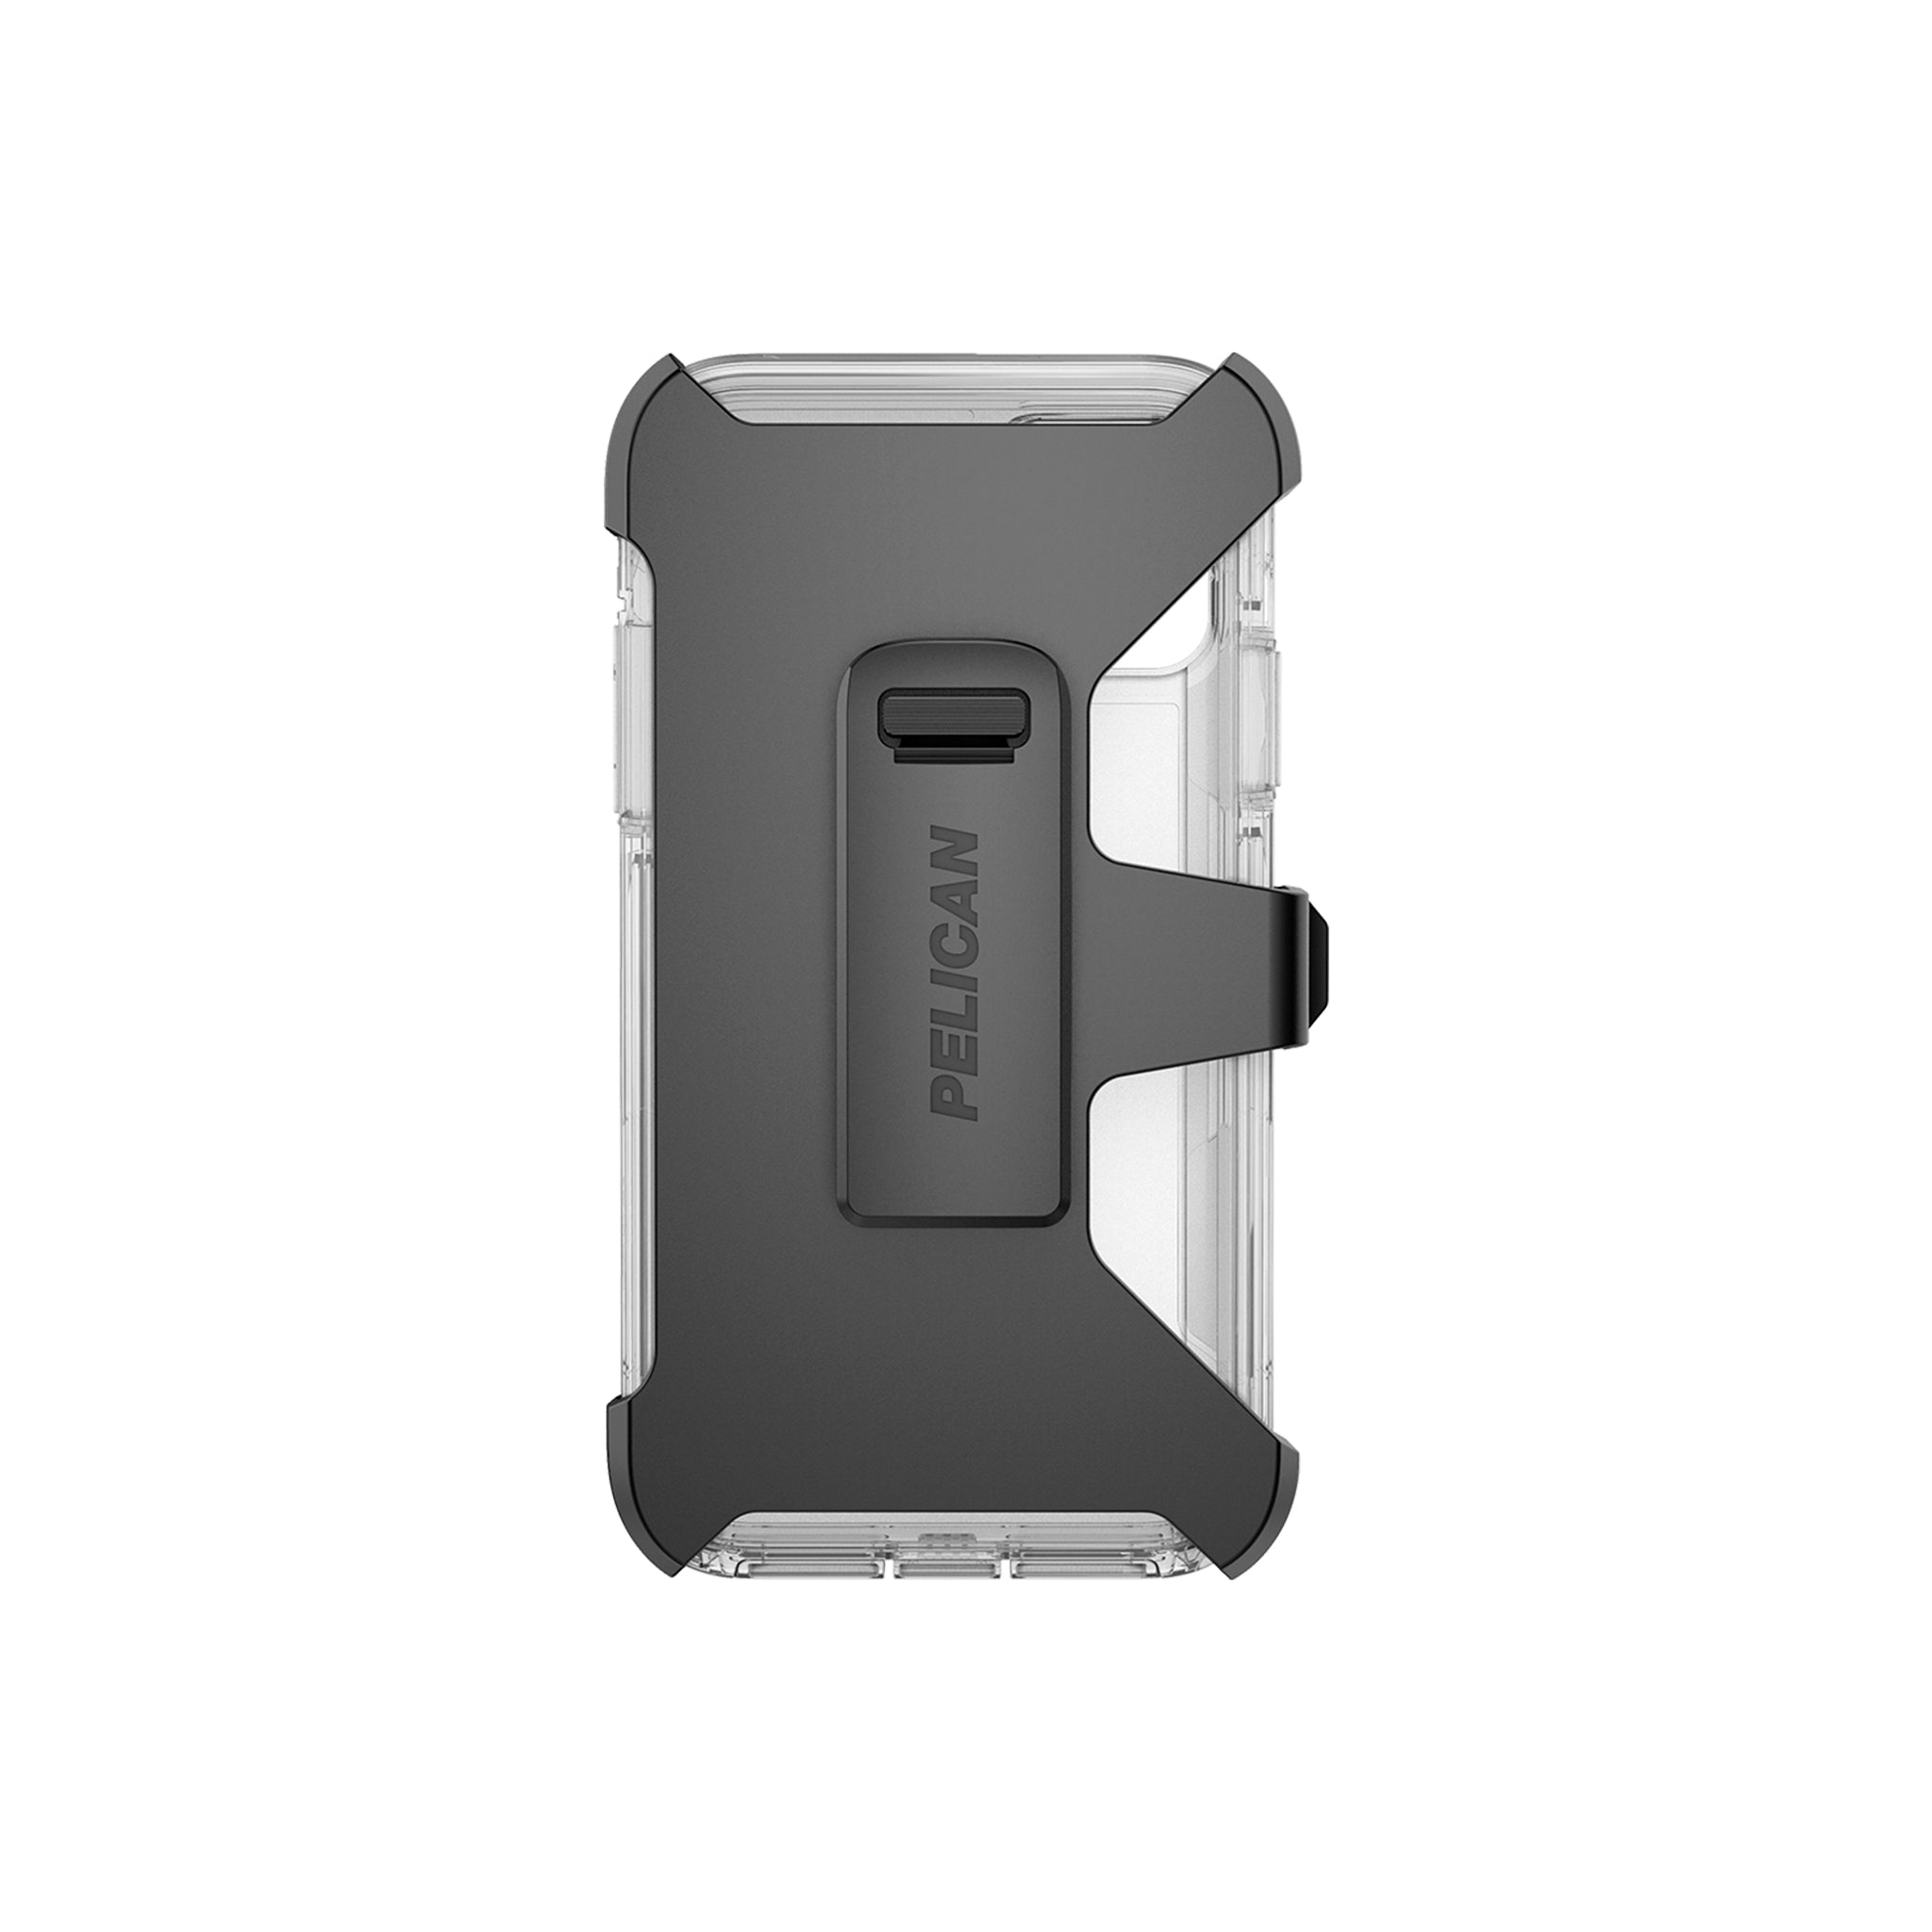 Pelican - Voyager Case For Apple iPhone 11 Pro / Xs / X - Clear